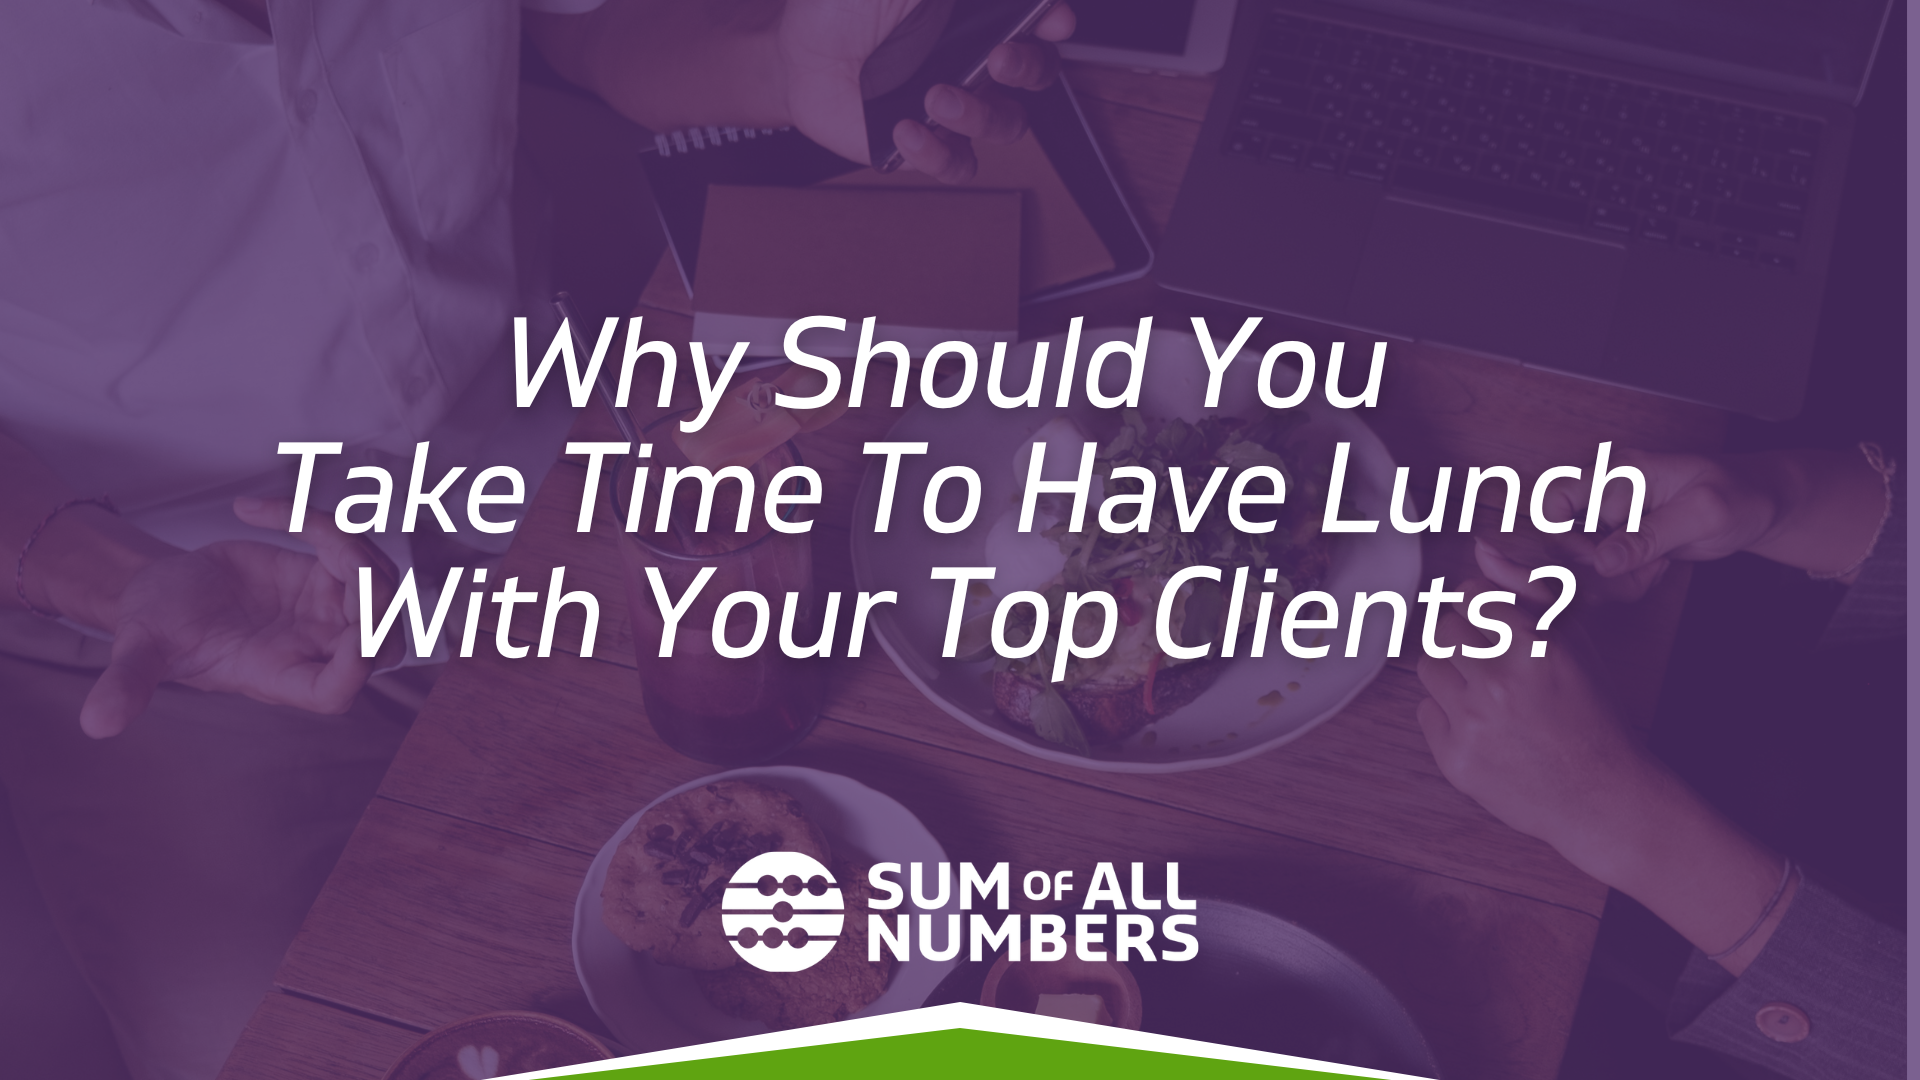 Why Should You Take Time To Have Lunch With Your Top Clients?